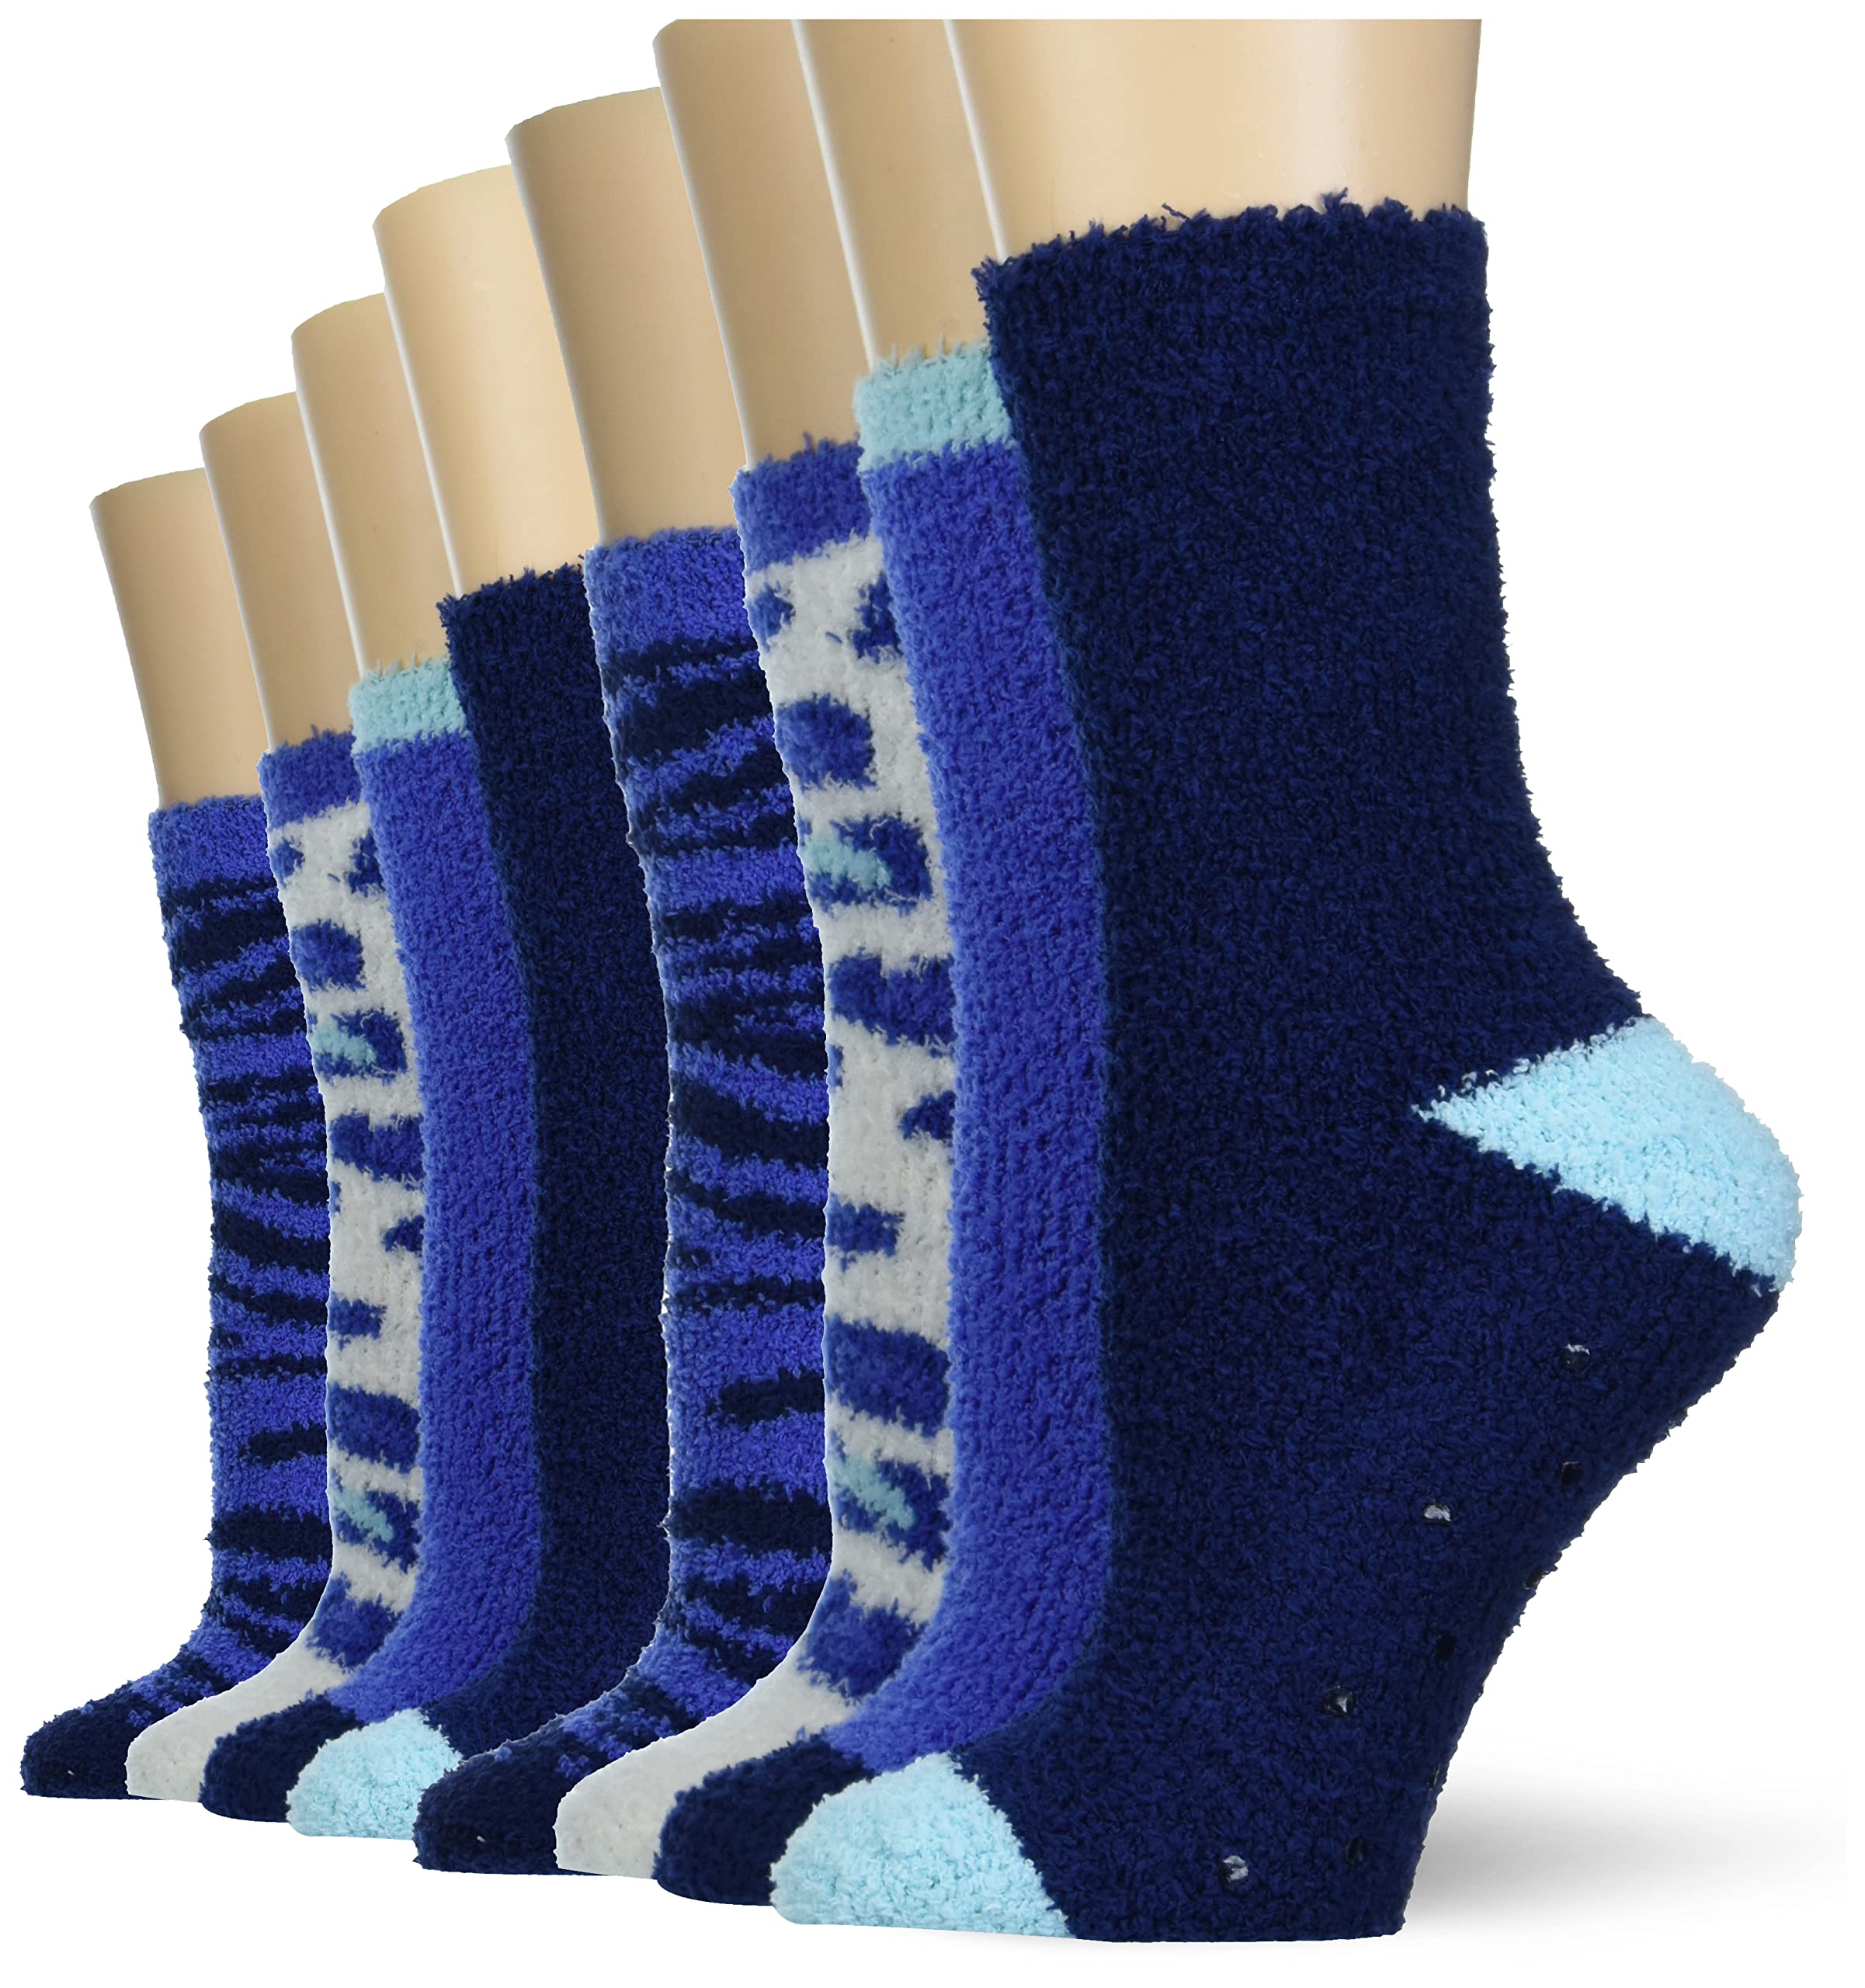 4-Pairs Amazon Essentials Women's Fuzzy Socks (Blue Multi) $4.70 + Free Shipping w/ Prime or on $35+